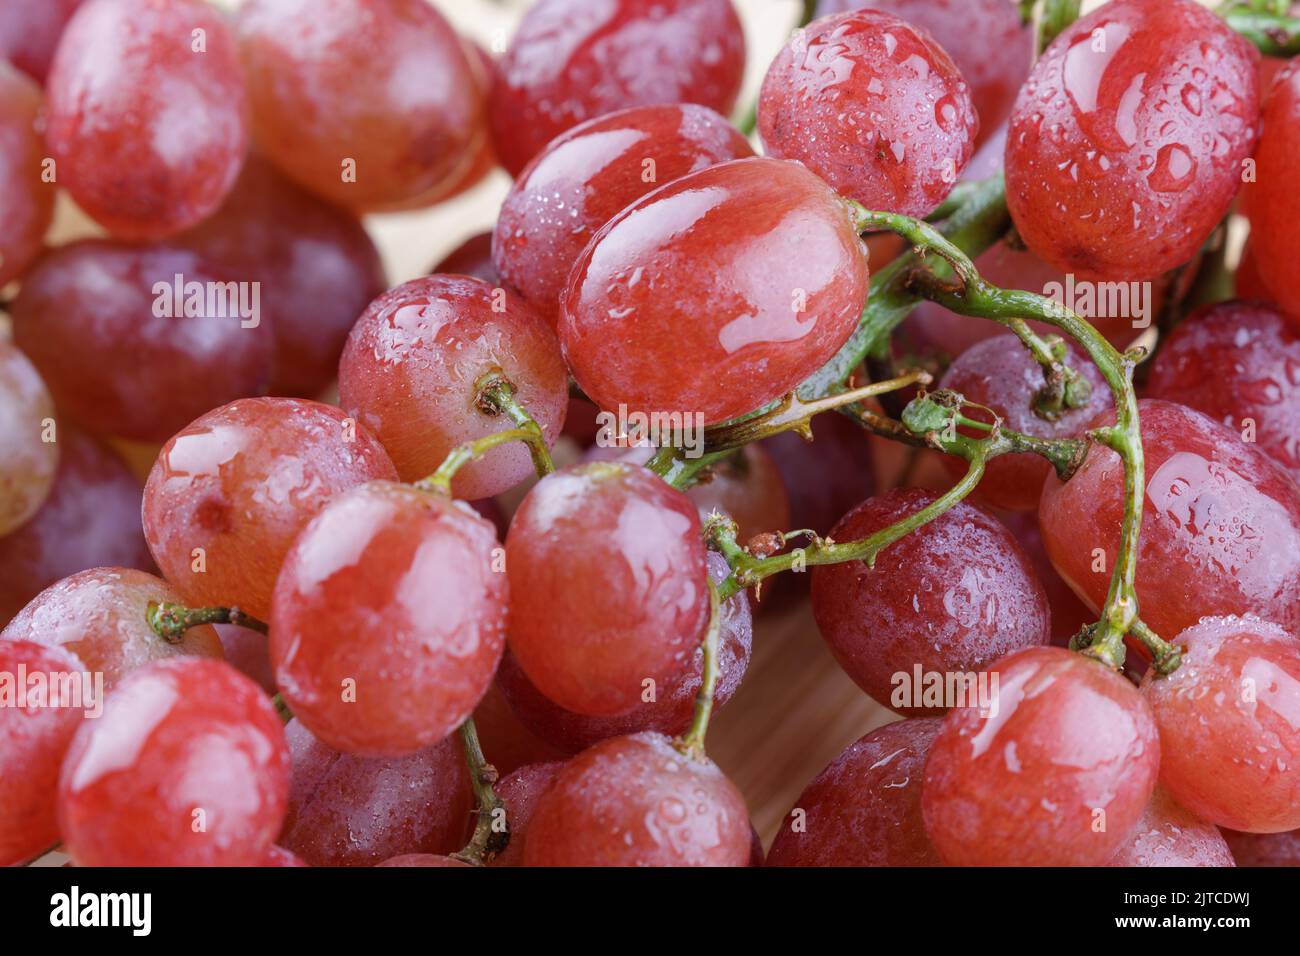 Close up of delicious organic grapes a healthy snack food Stock Photo